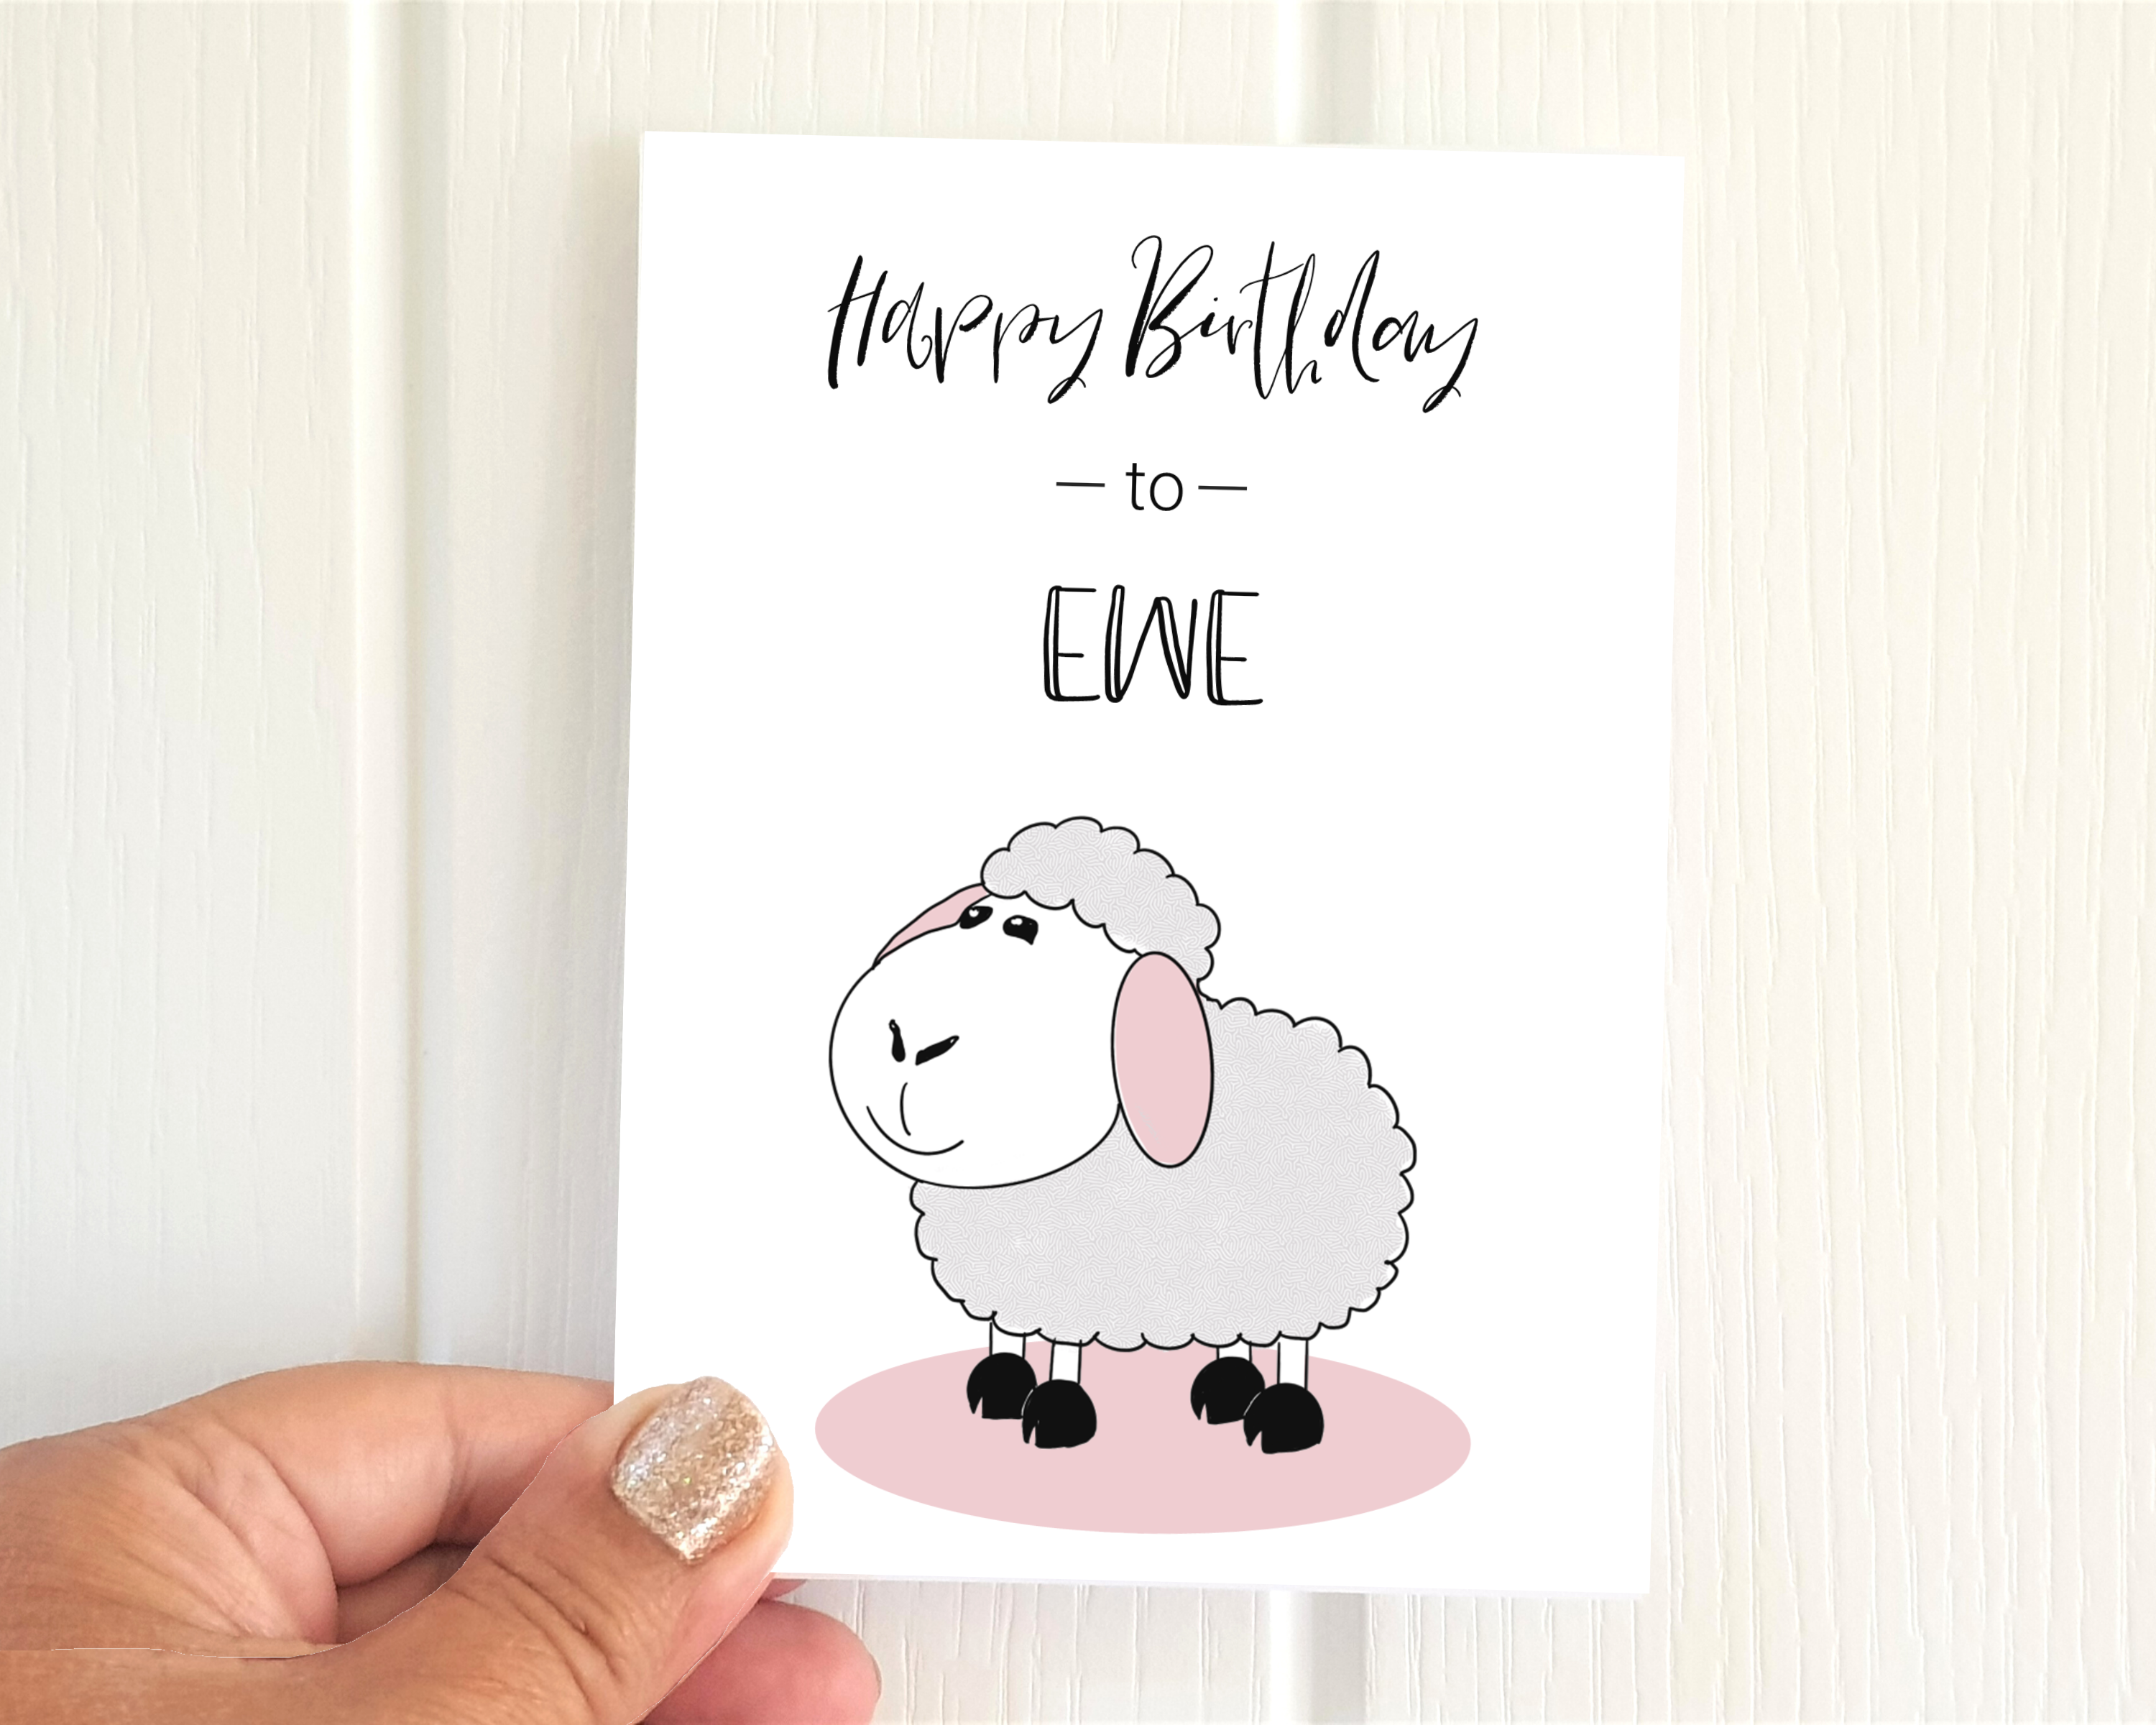 Poppleberry A6 folded birthday card, with a smiling white sheep illustration, on white cardstock, size compared to a thumb.